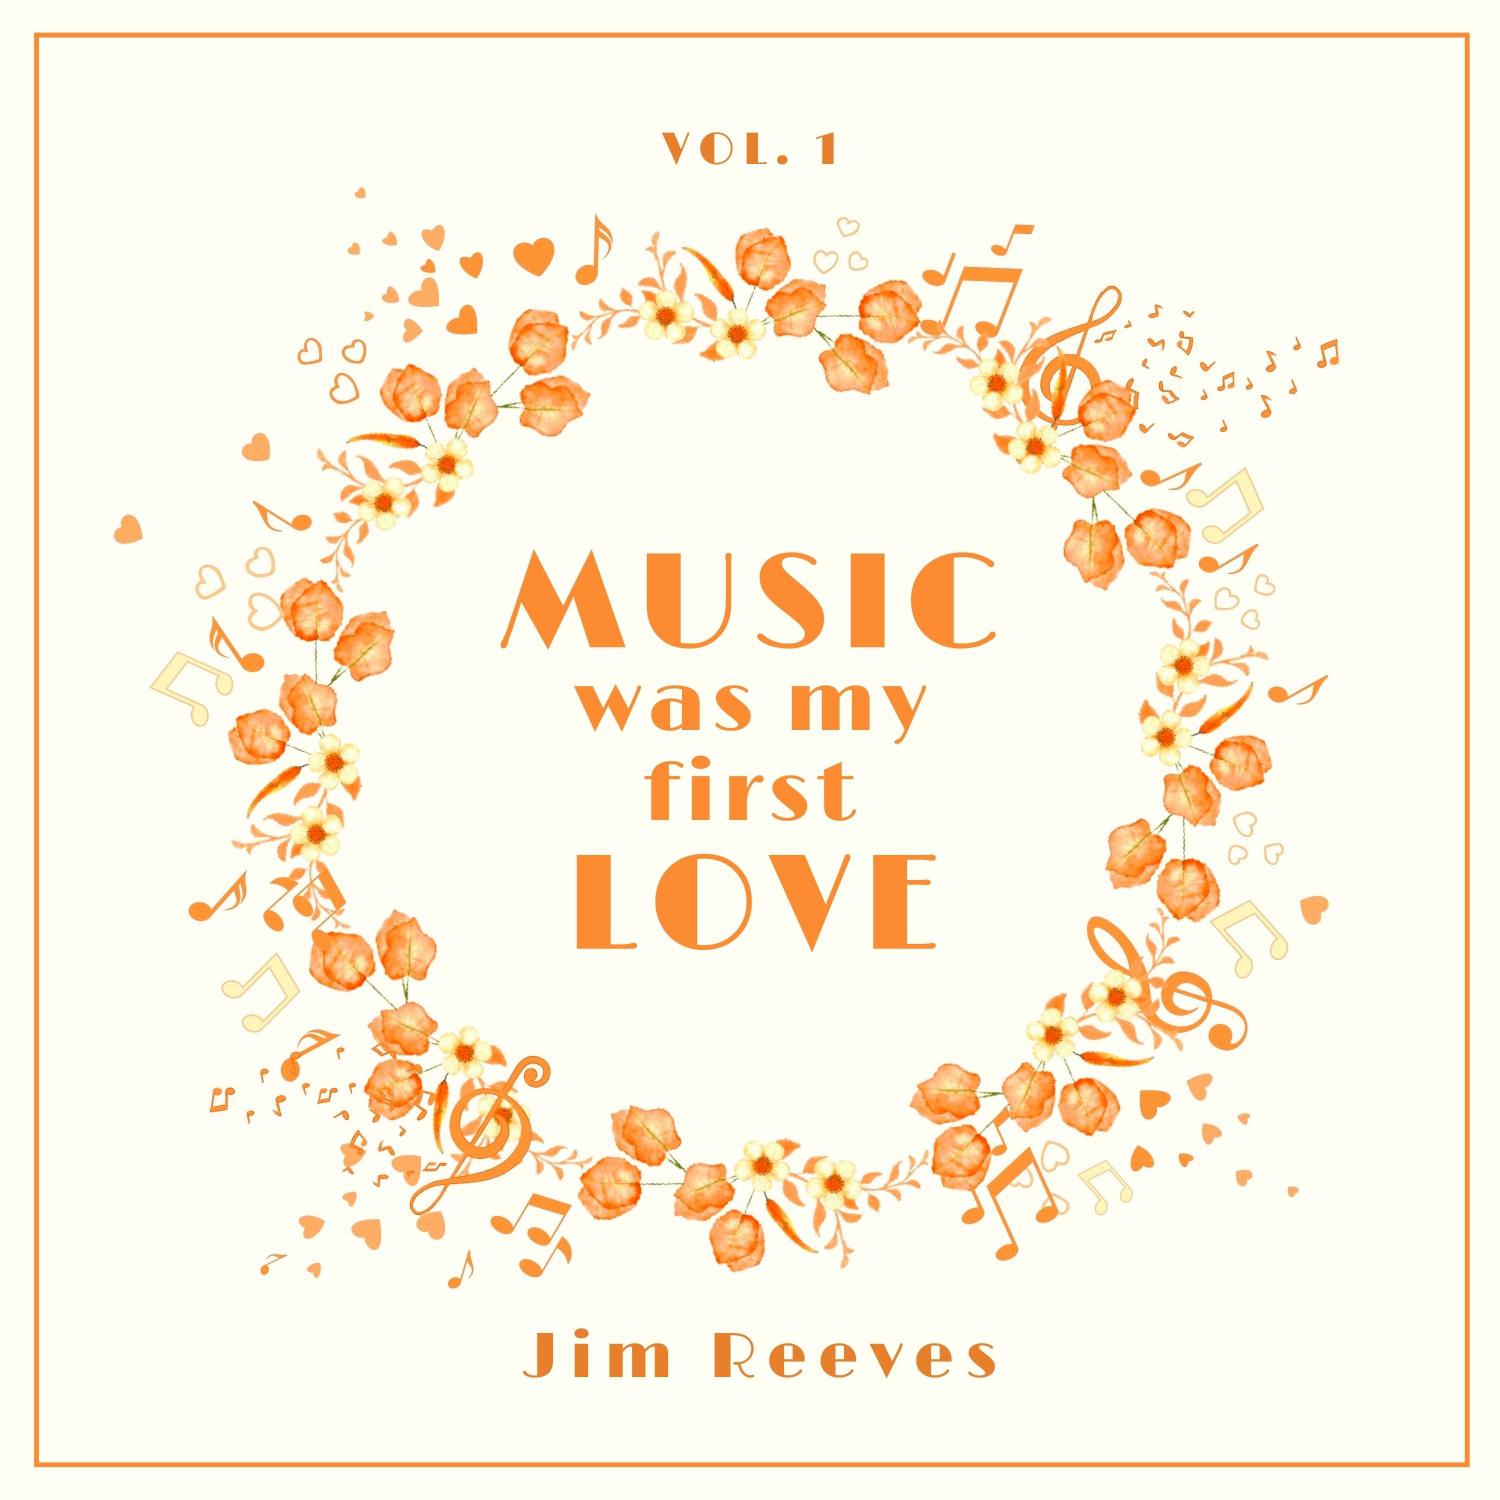 Jim Reeves - I Love to Say 'i Love You' (Theme of Love) (Original Mix)